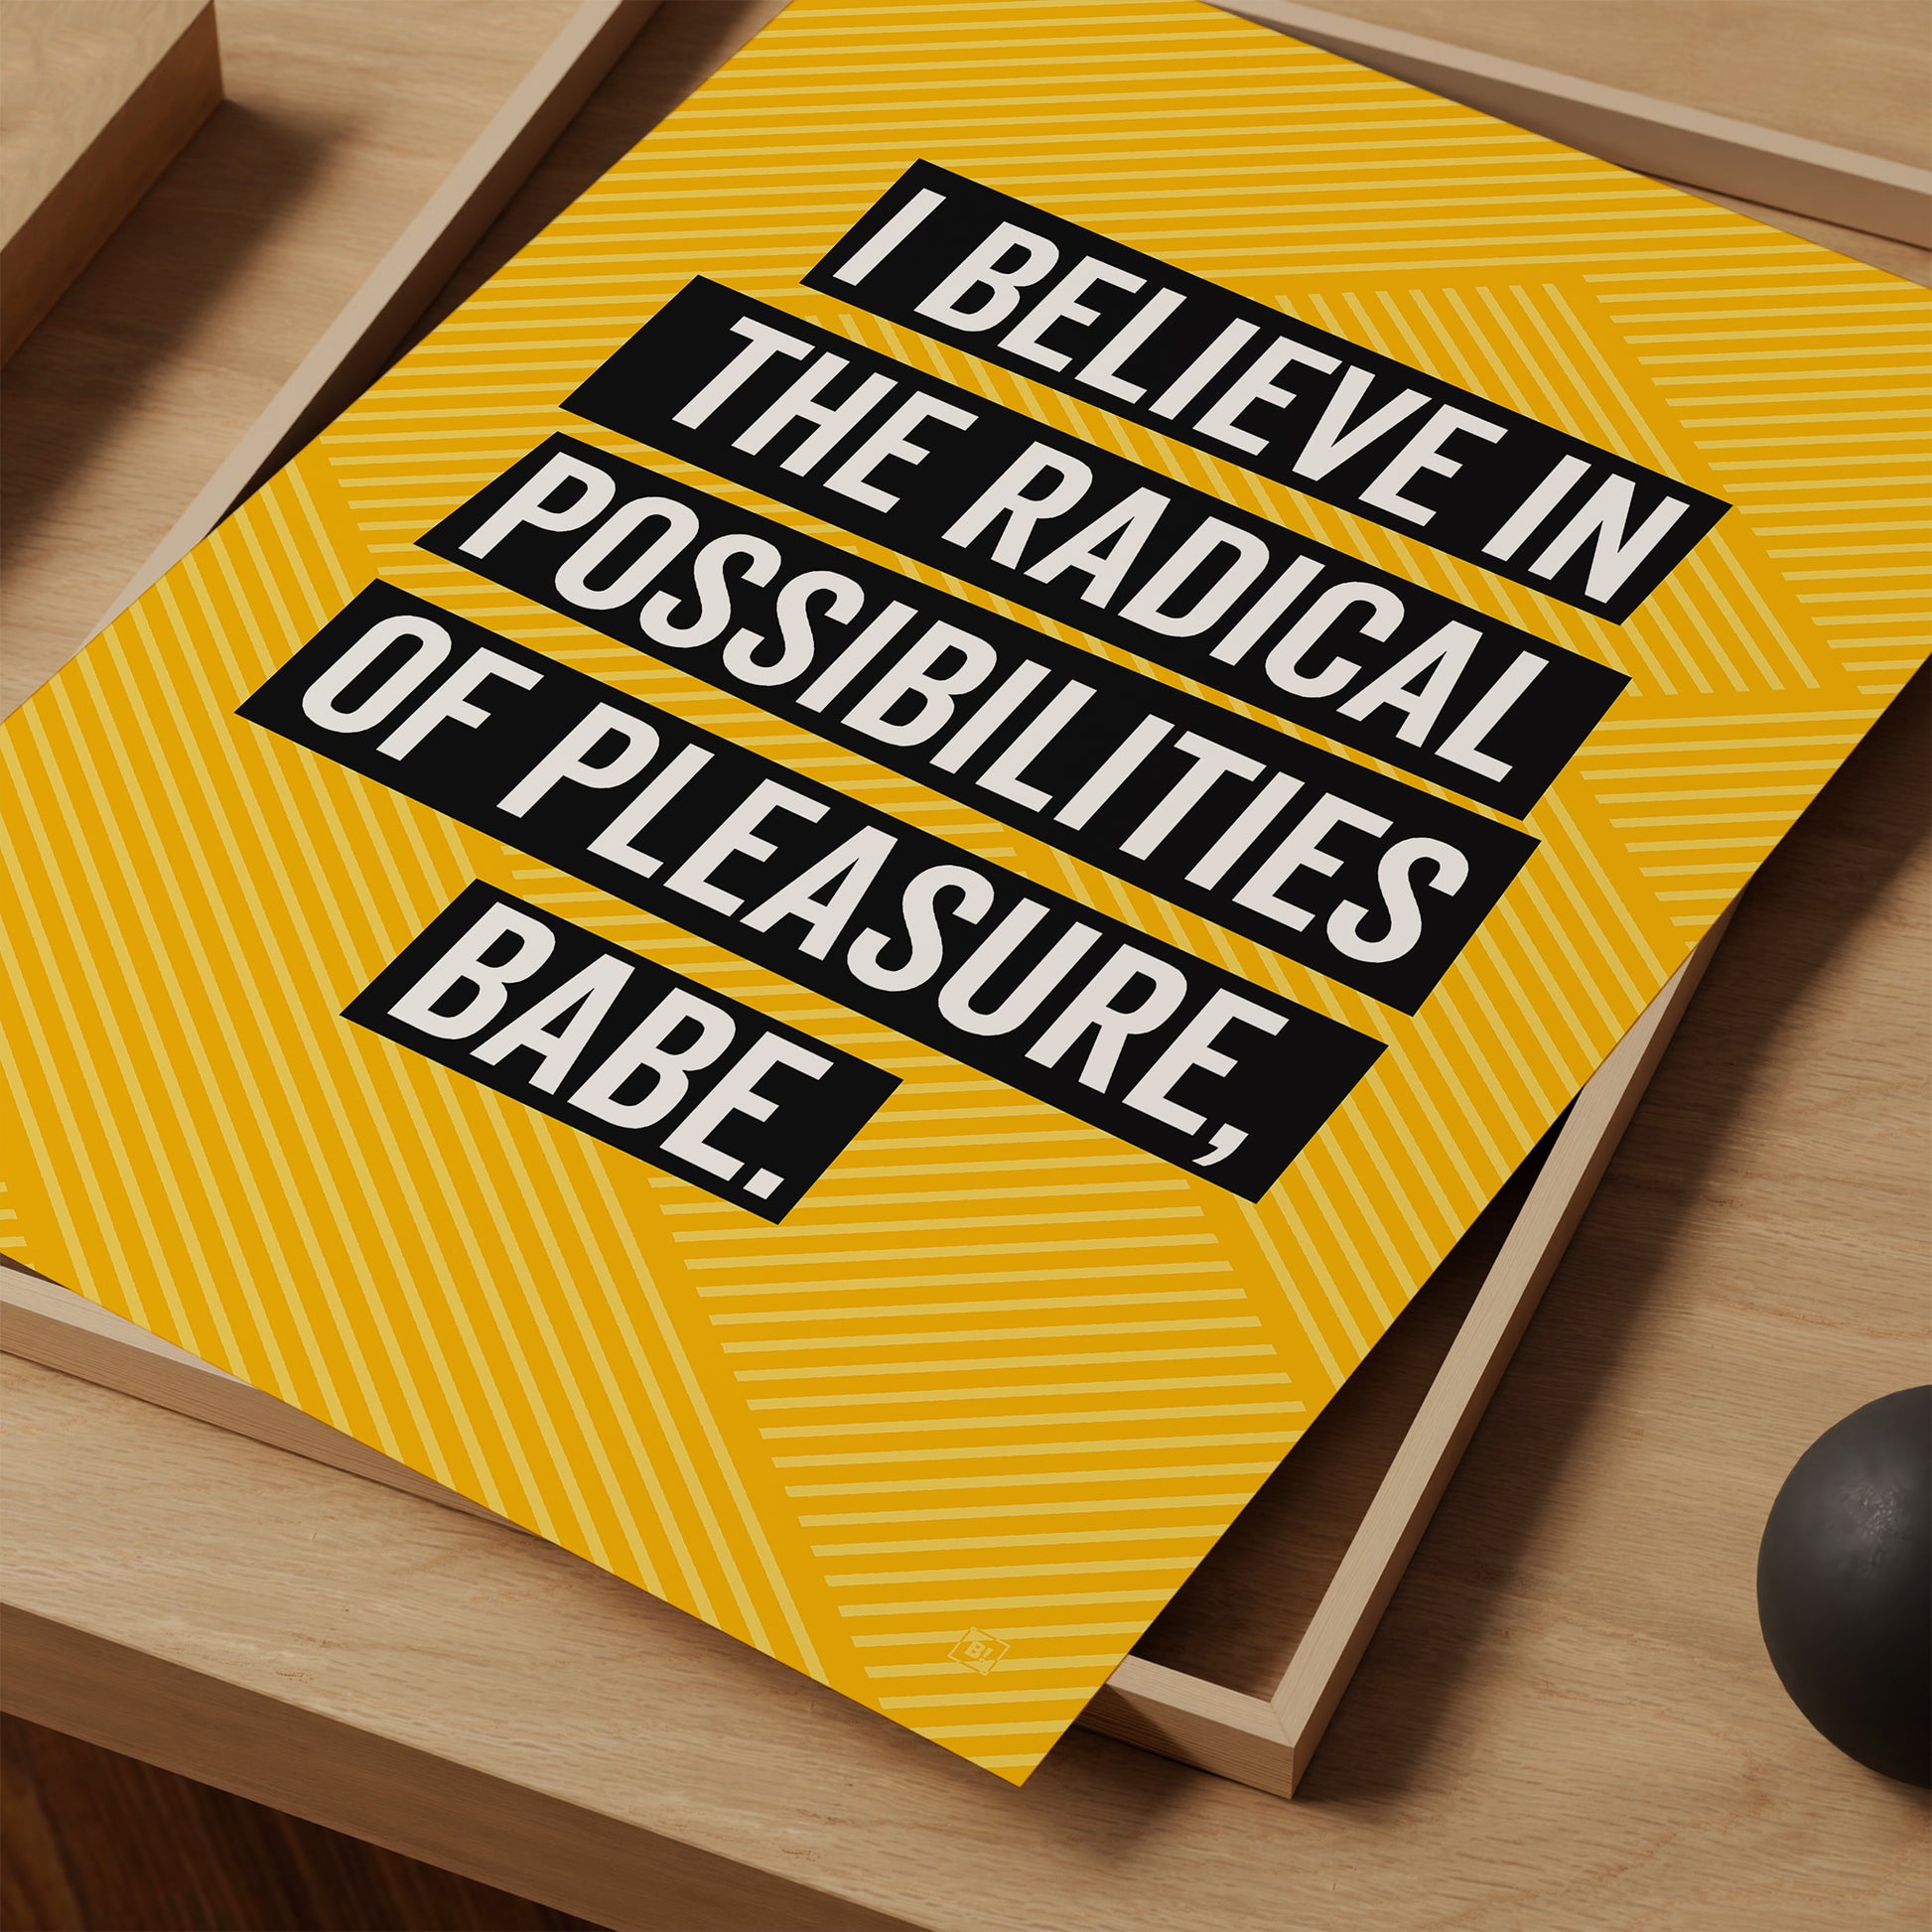 Be inspired by our golden yellow Bikini Kill "I Believe in the Radical Possibilities of Pleasure Babe" lyrics art print! This artwork has been printed using the giclée process on archival acid-free paper. It is showcased as a close-up print, highlighting its timeless beauty in every detail.